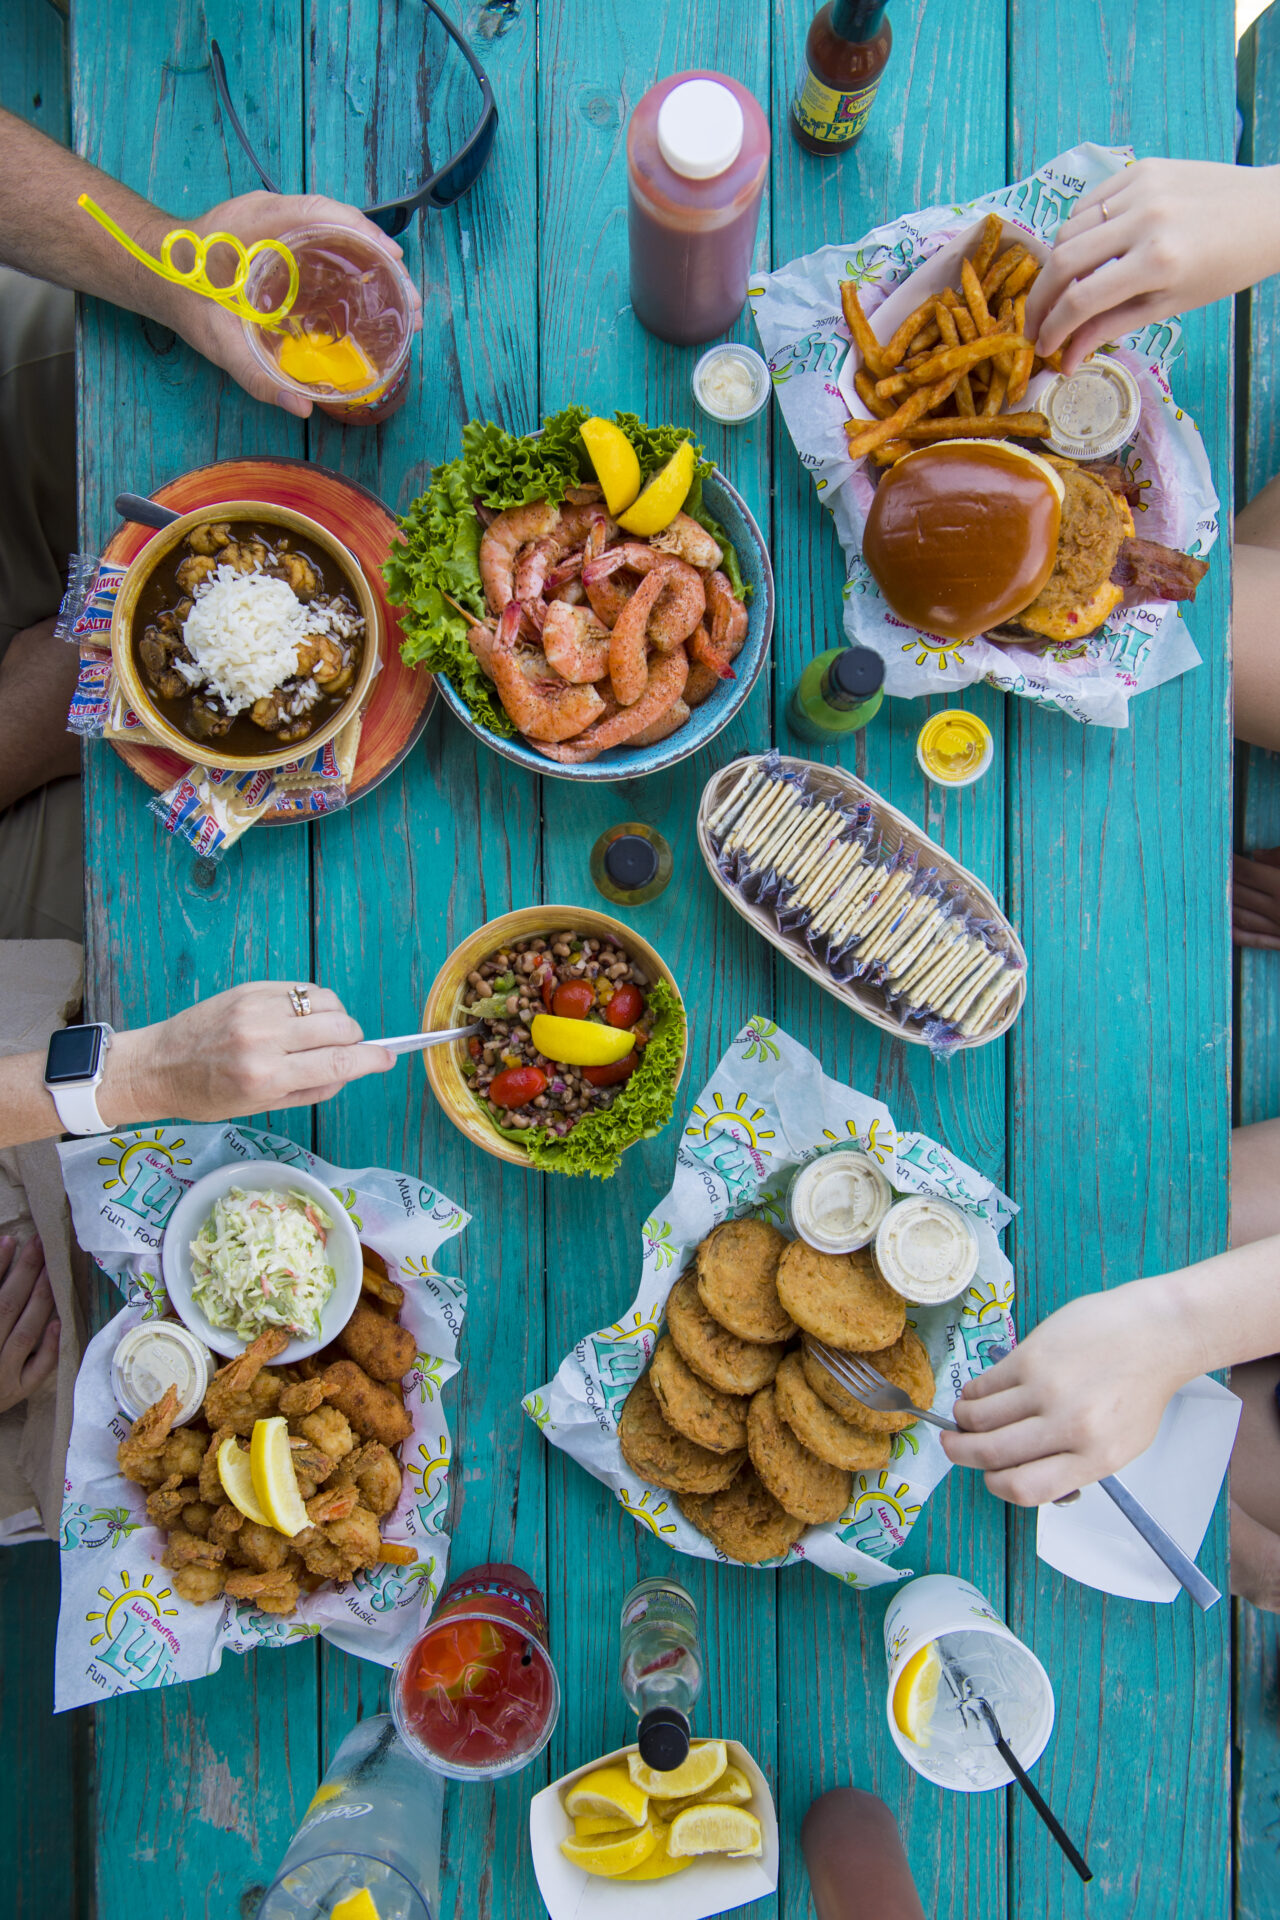 overhead photo of a variety of foods on teal table at LuLu's restaurant in Gulf Shores, Alabama. Food includes fried green tomatoes, fried shrimp, a sandwich, and more. Photo provided by Visit Alabama Beaches

best family-friendly restaurants in gulf shores